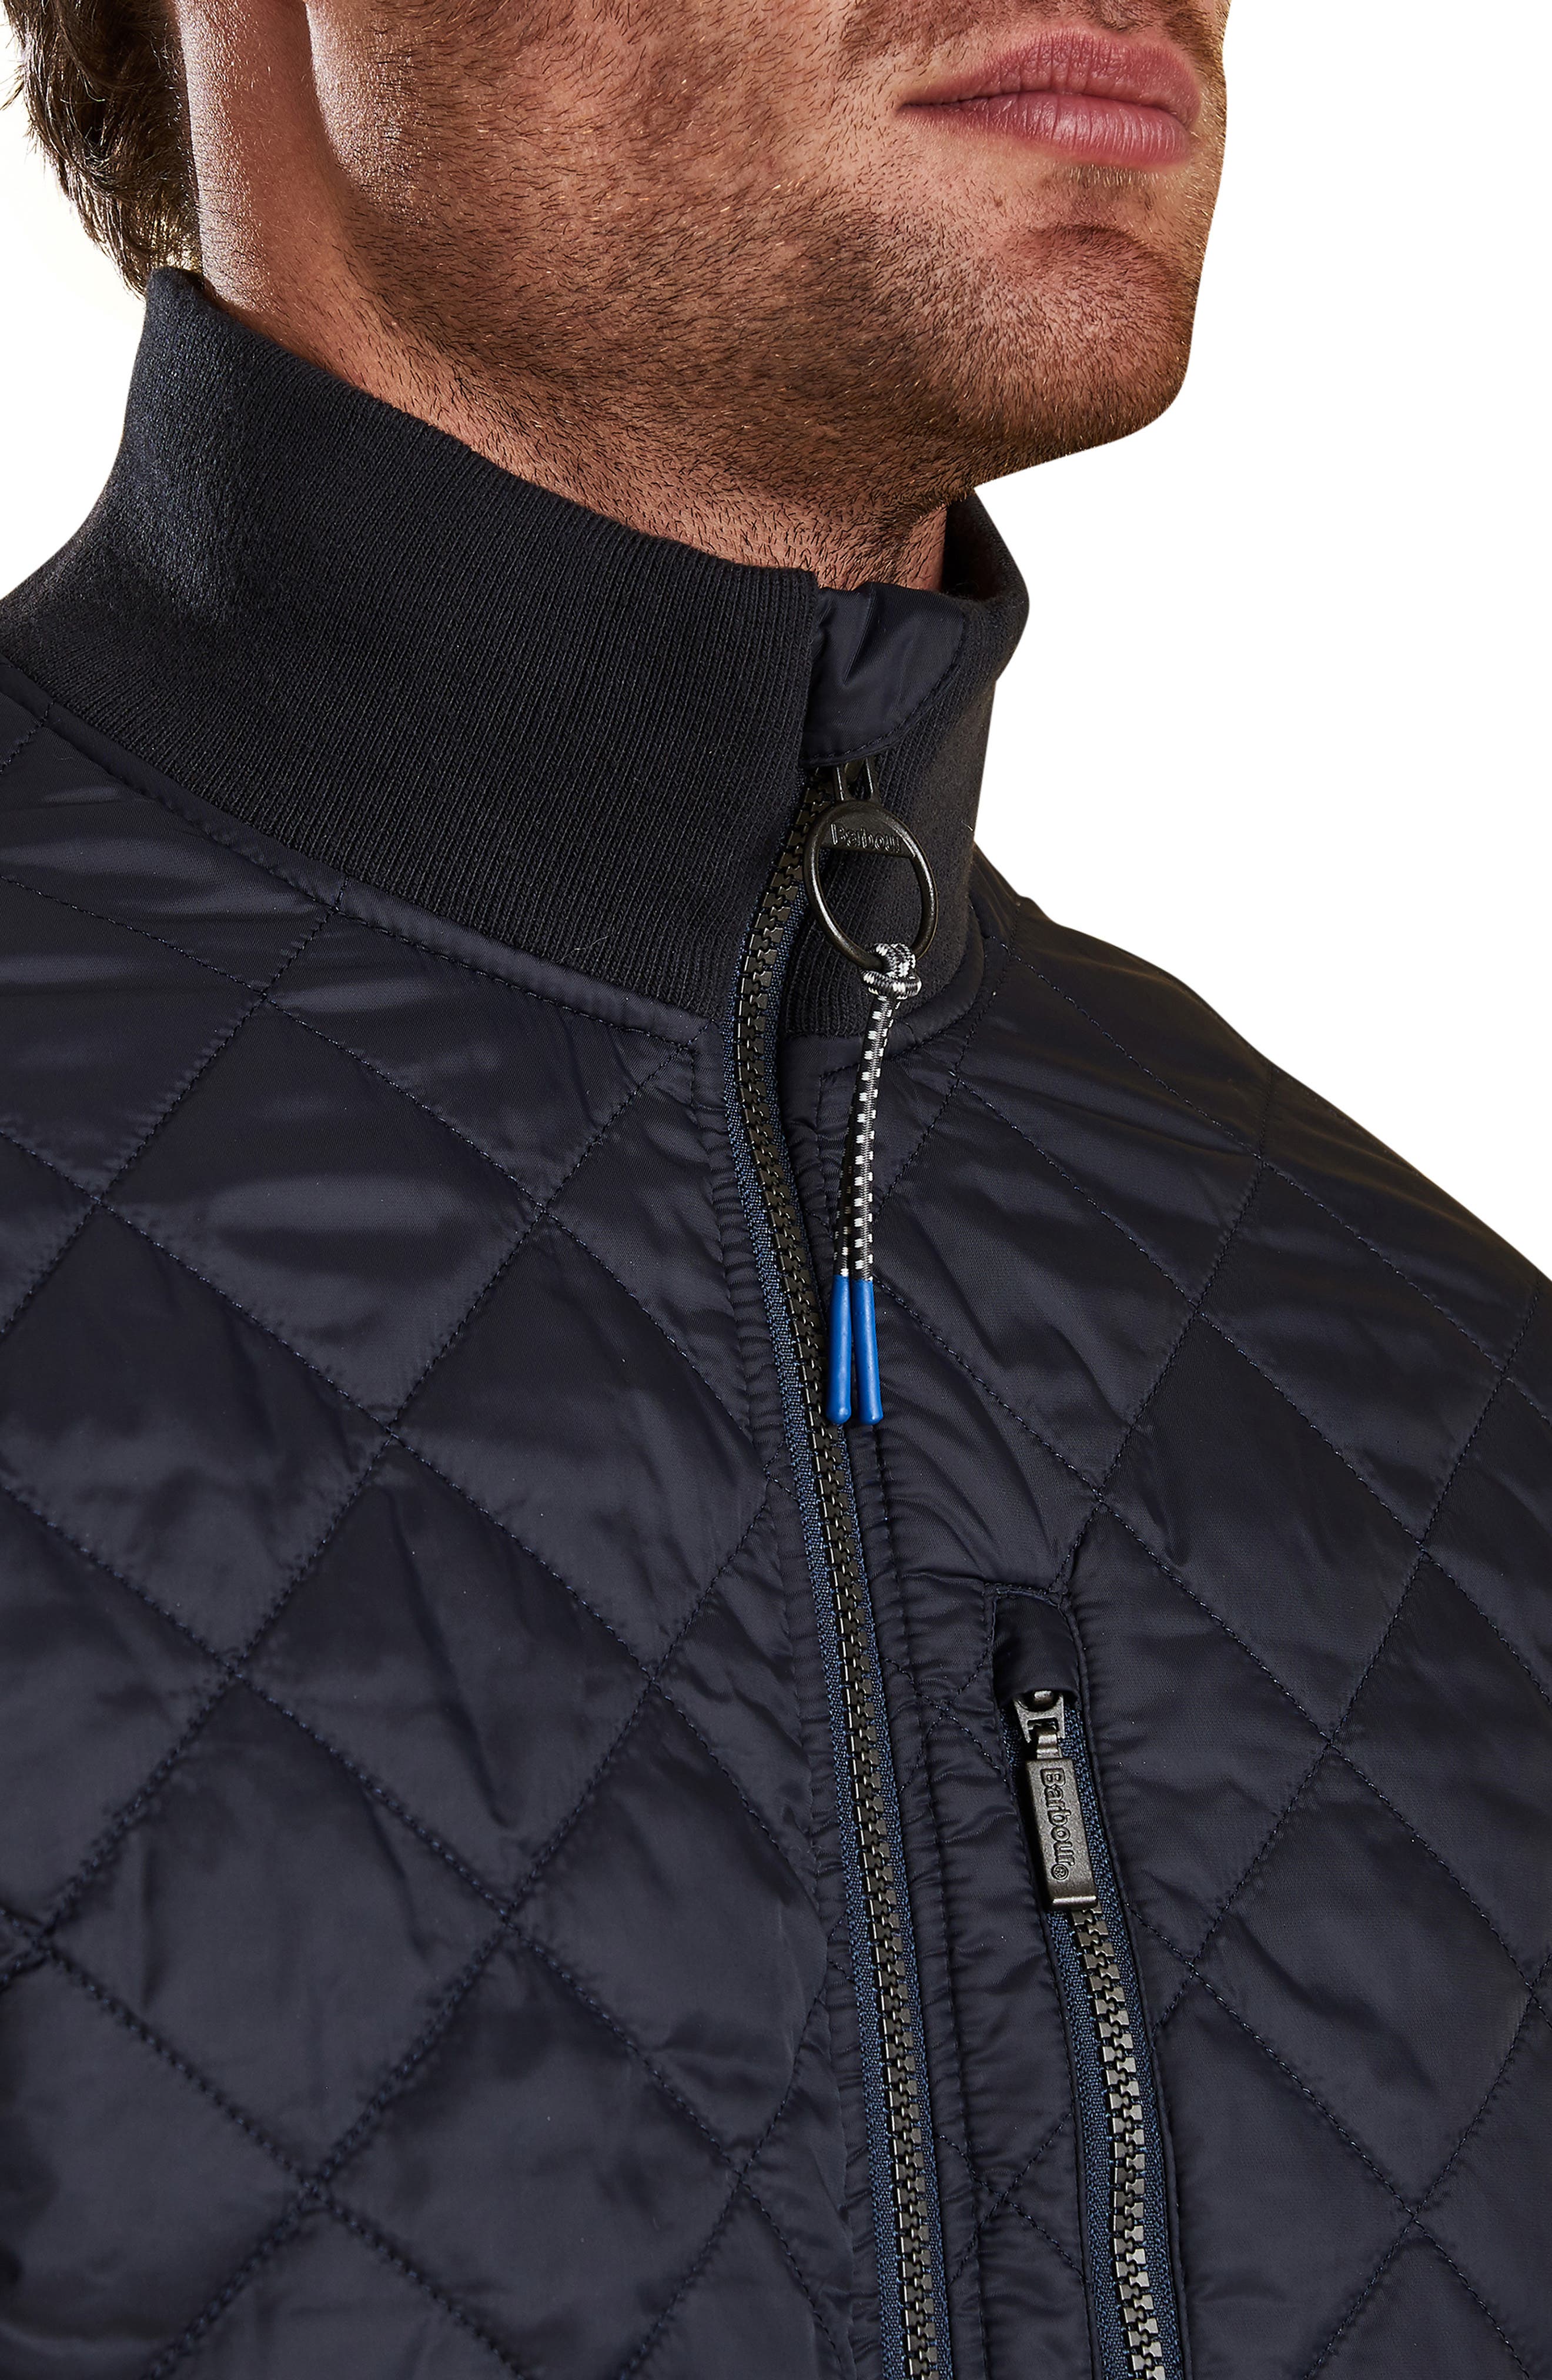 barbour astern quilted bomber jacket in black